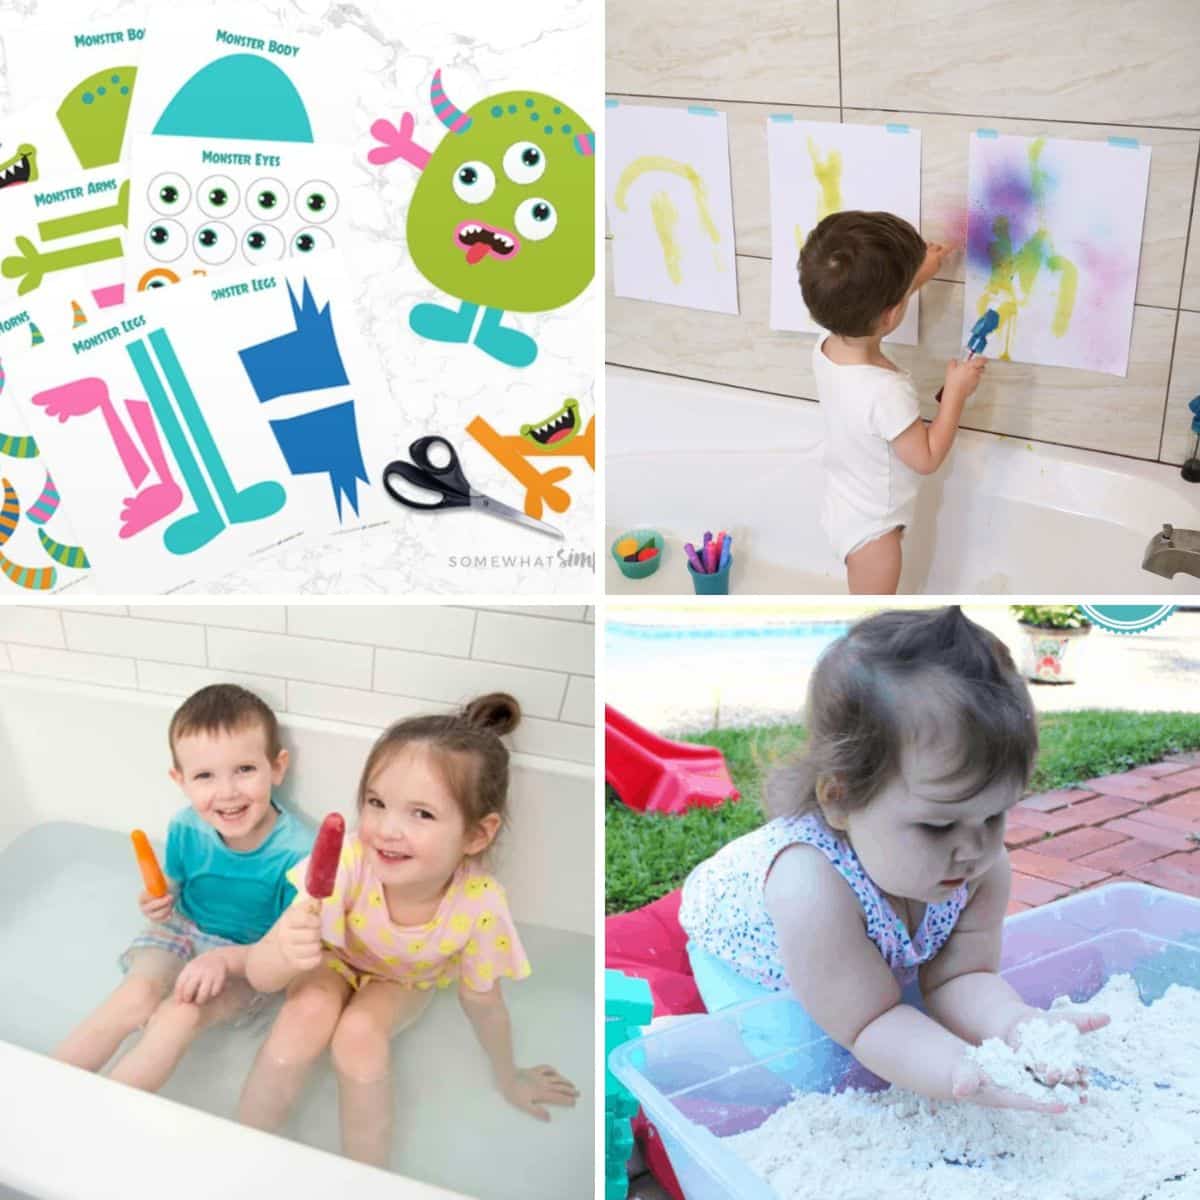 4 images of low prep activities for toddlers.